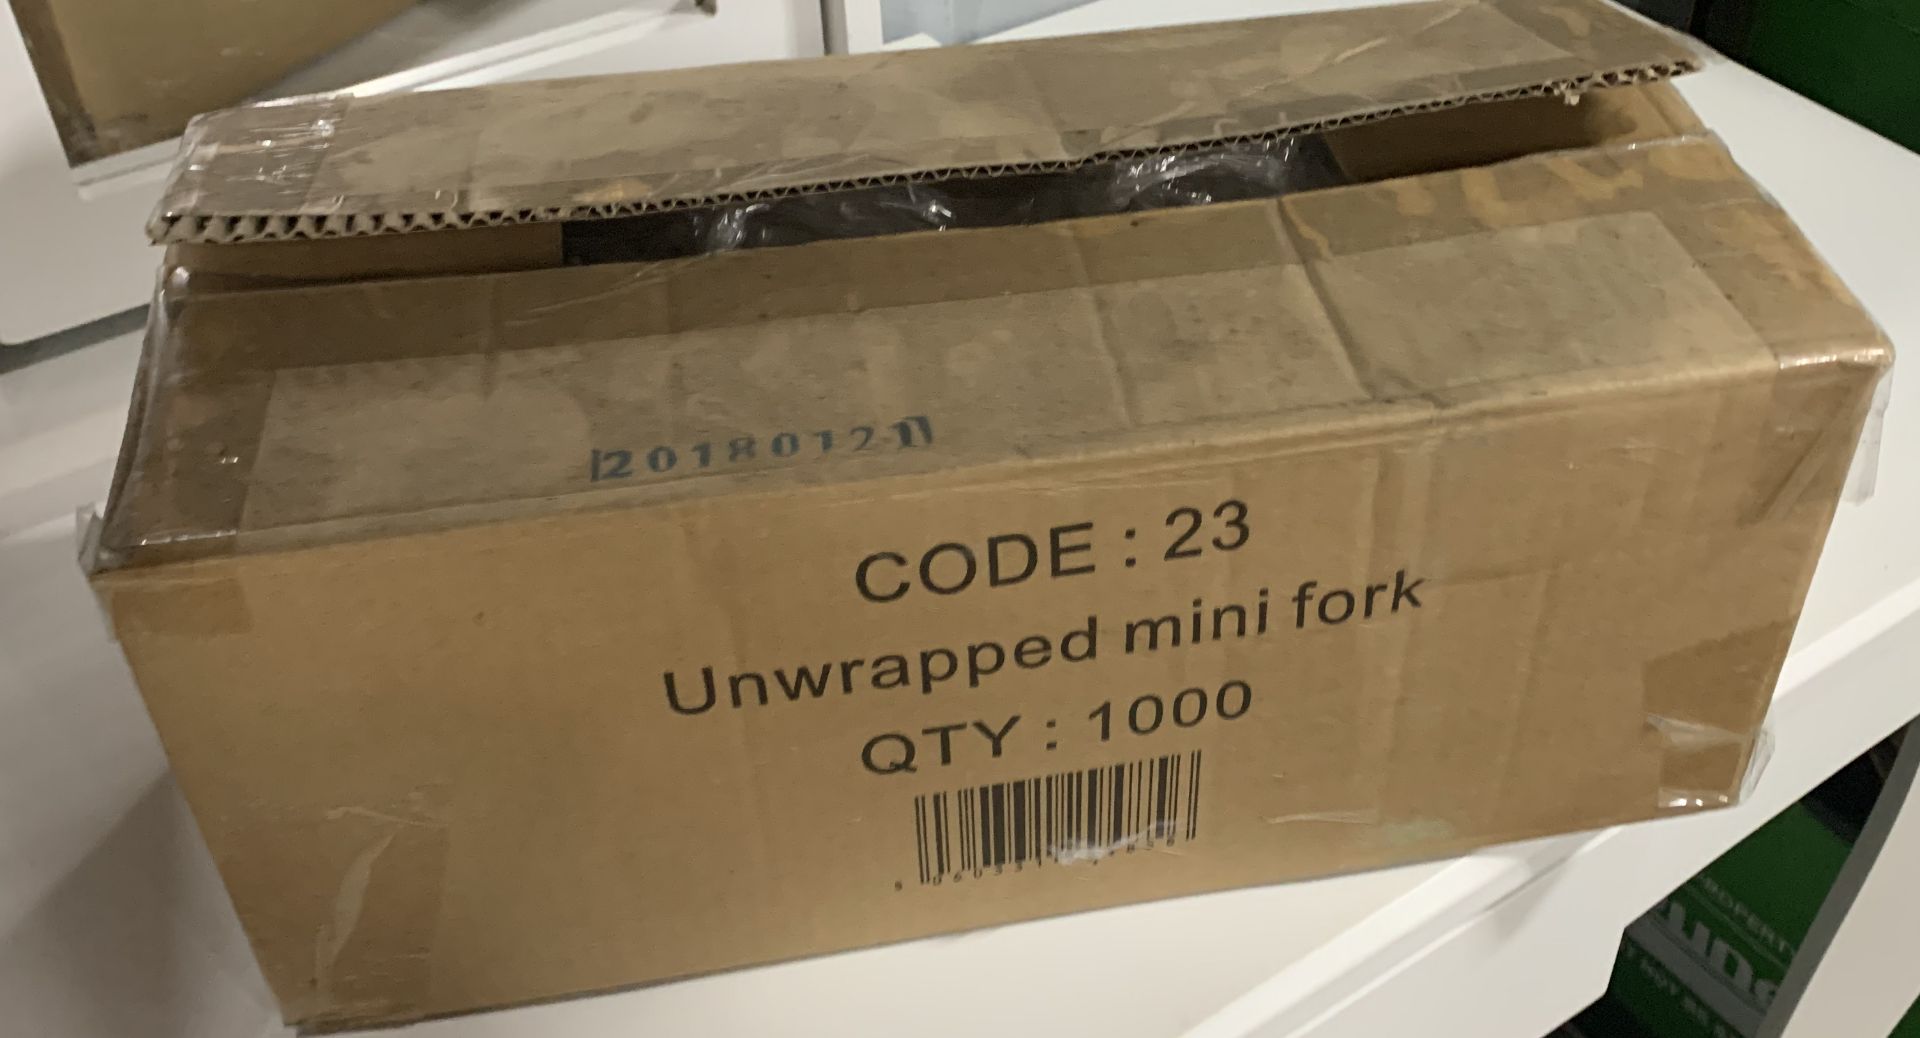 1 x Box of 1000 Mini Forks by 888 Gastro Disposables - Image 3 of 5